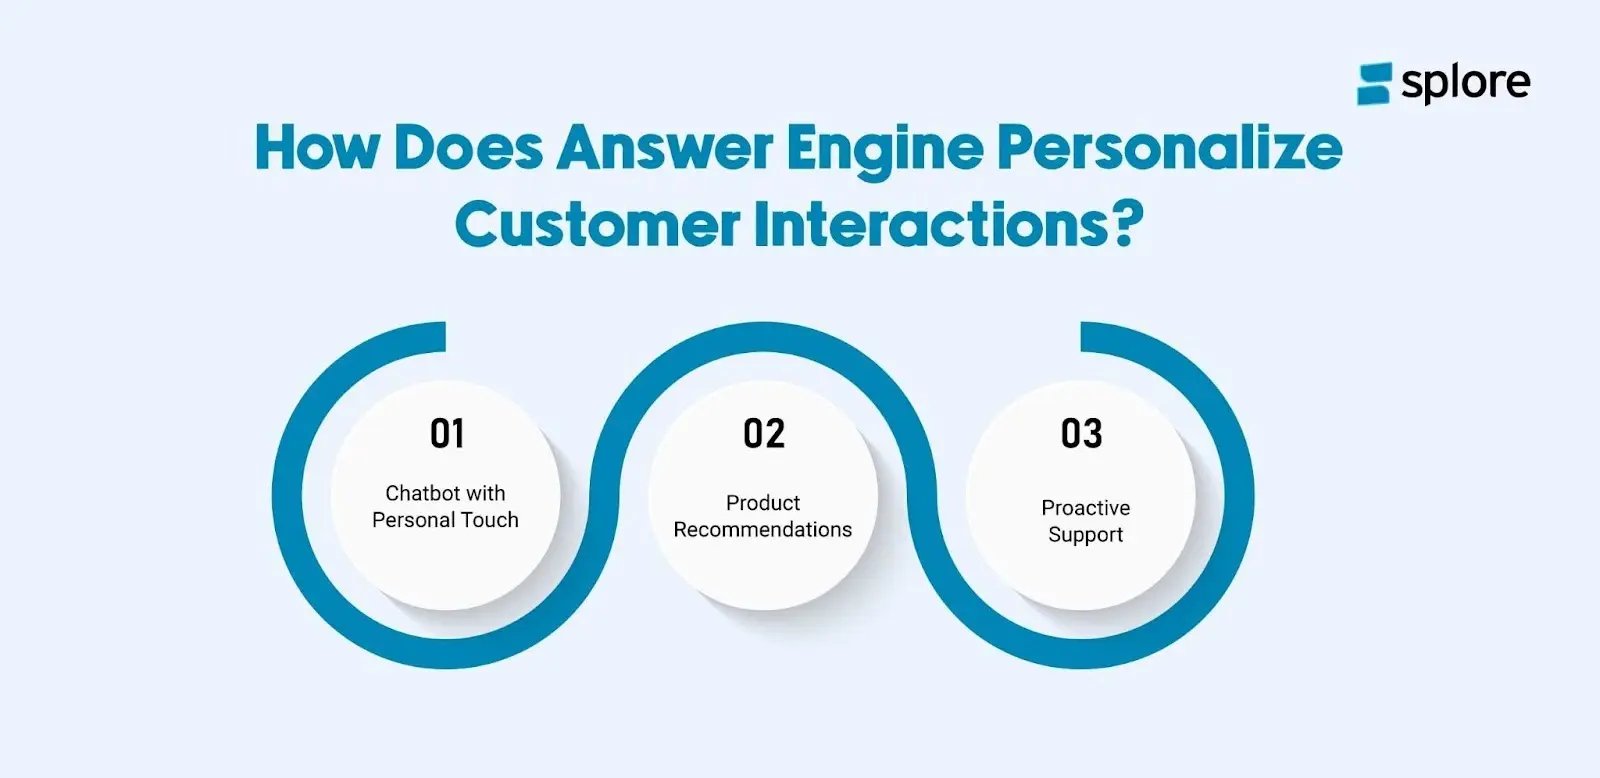 How does answer engine personalize customer interactions